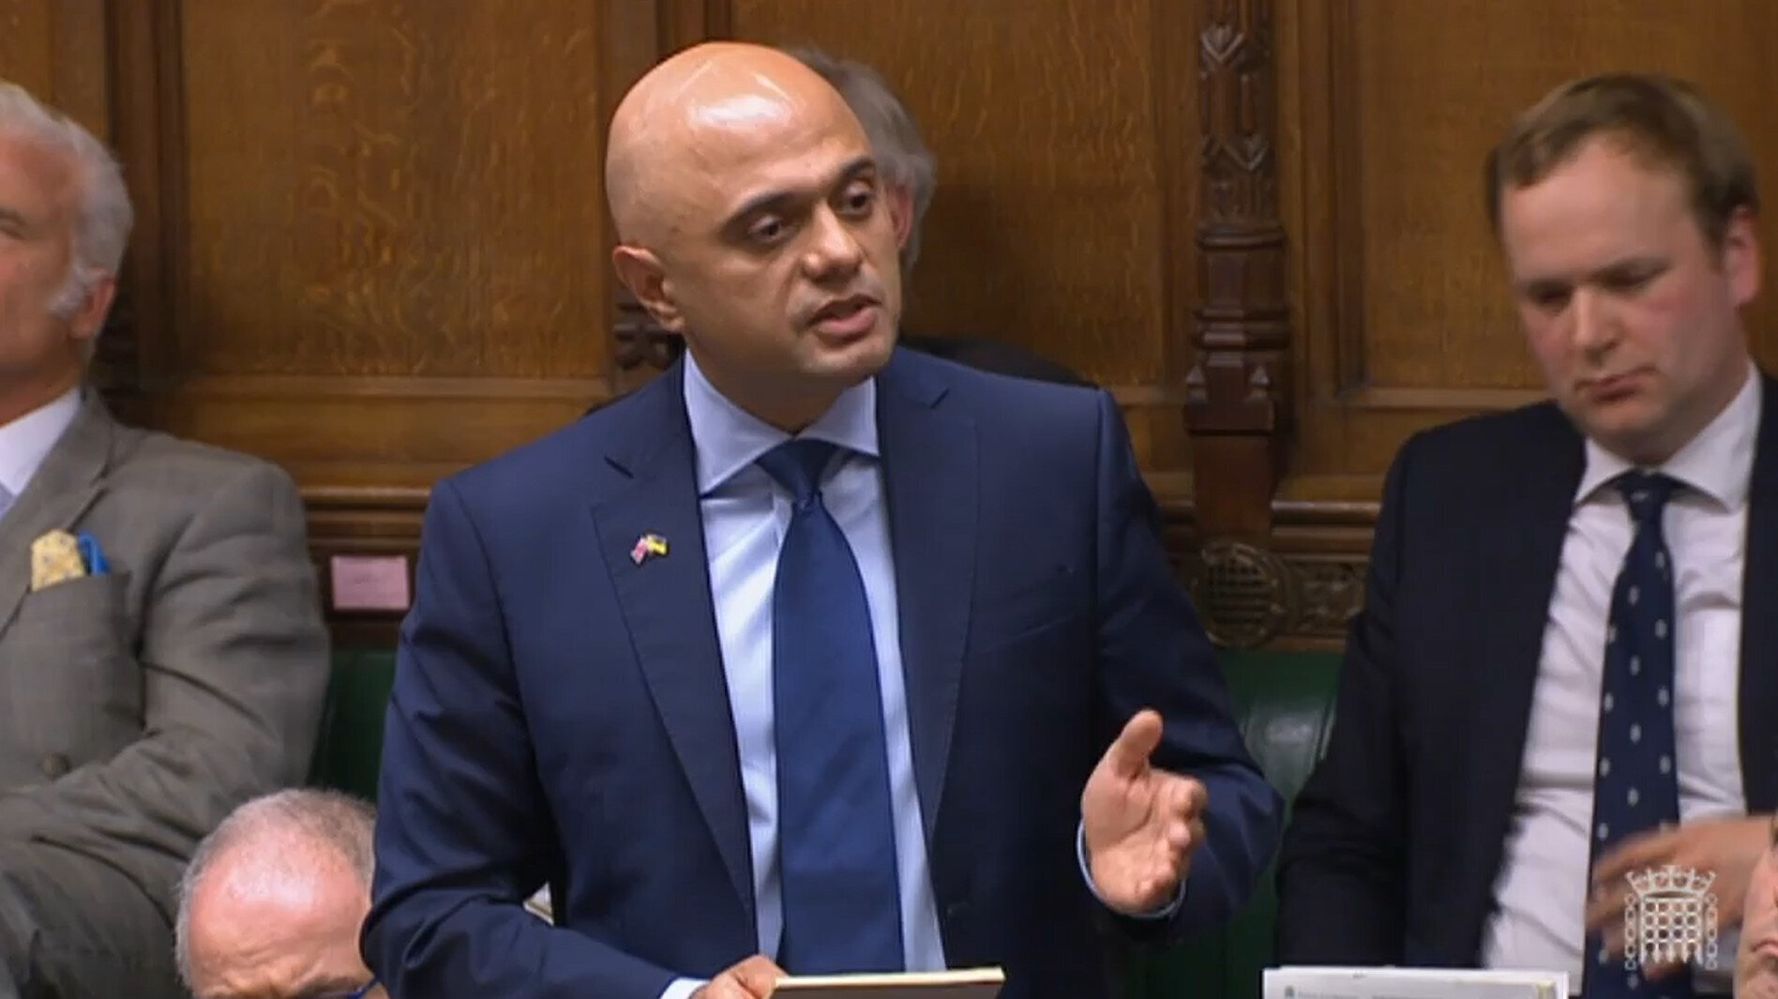 Sajid Javid Claims He Resigned Soon after Concluding ‘Enough Is Enough’